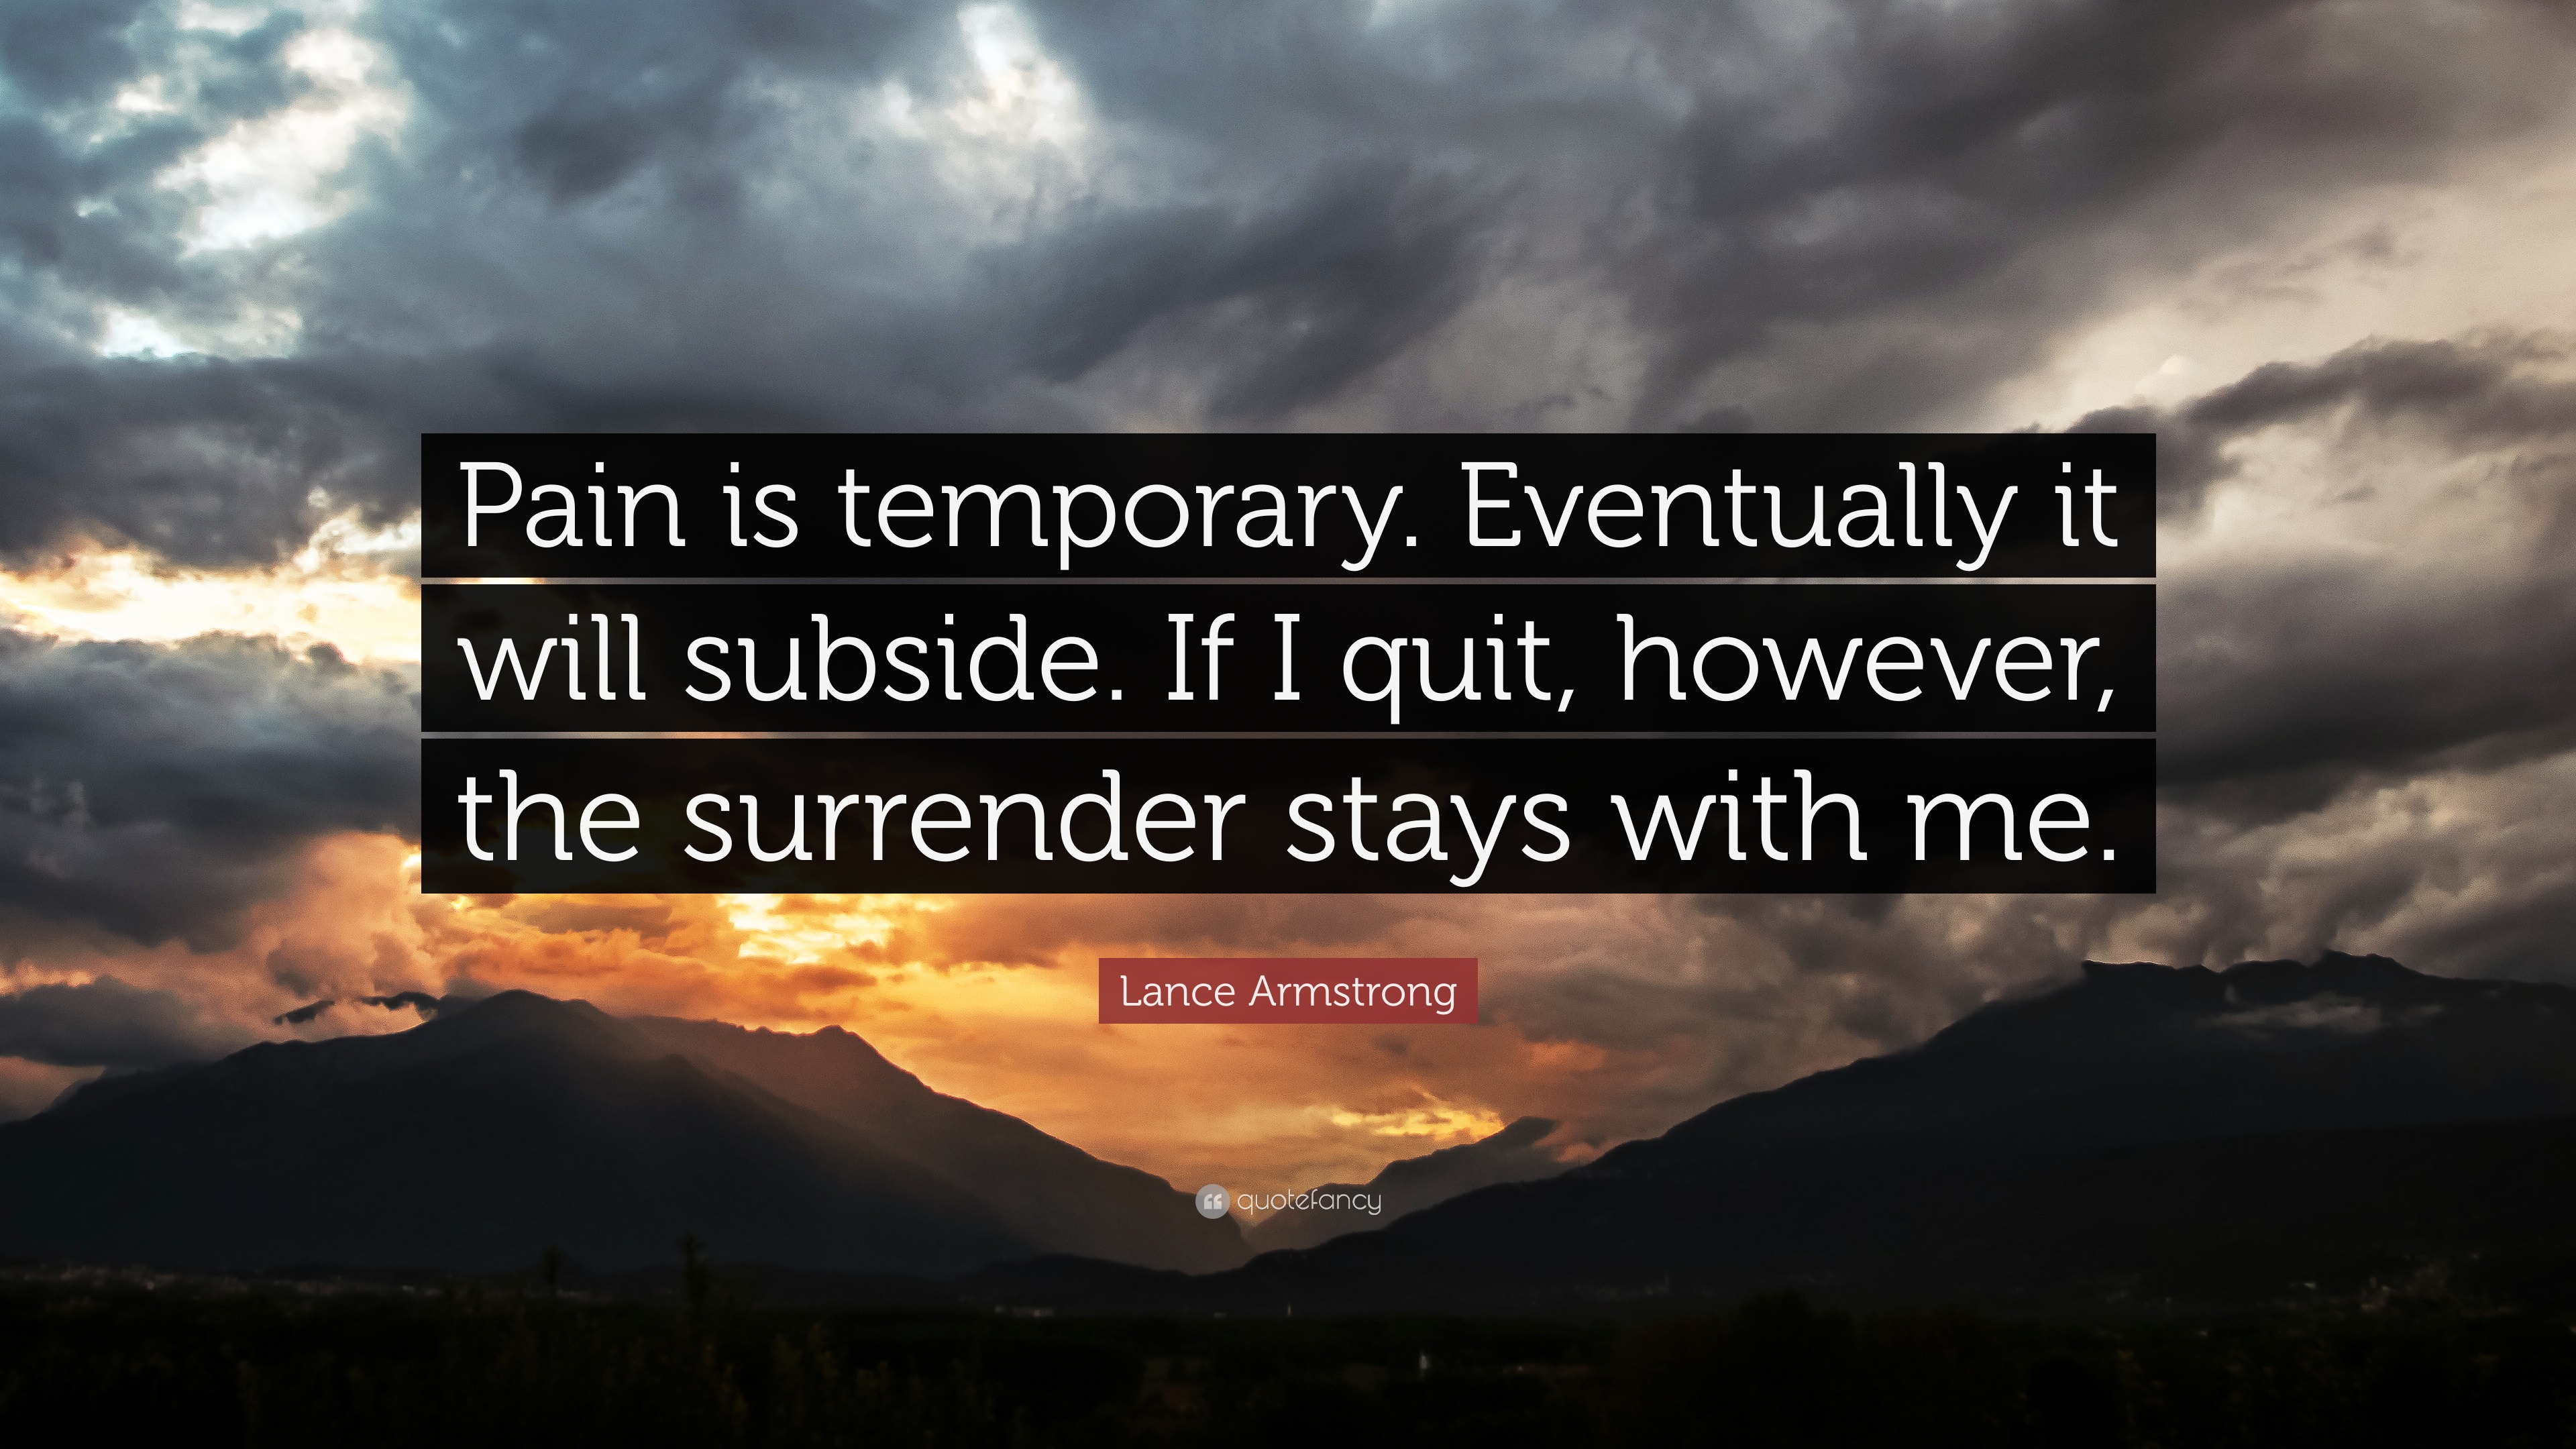 Lance Armstrong Quote: "Pain is temporary. Eventually it ...